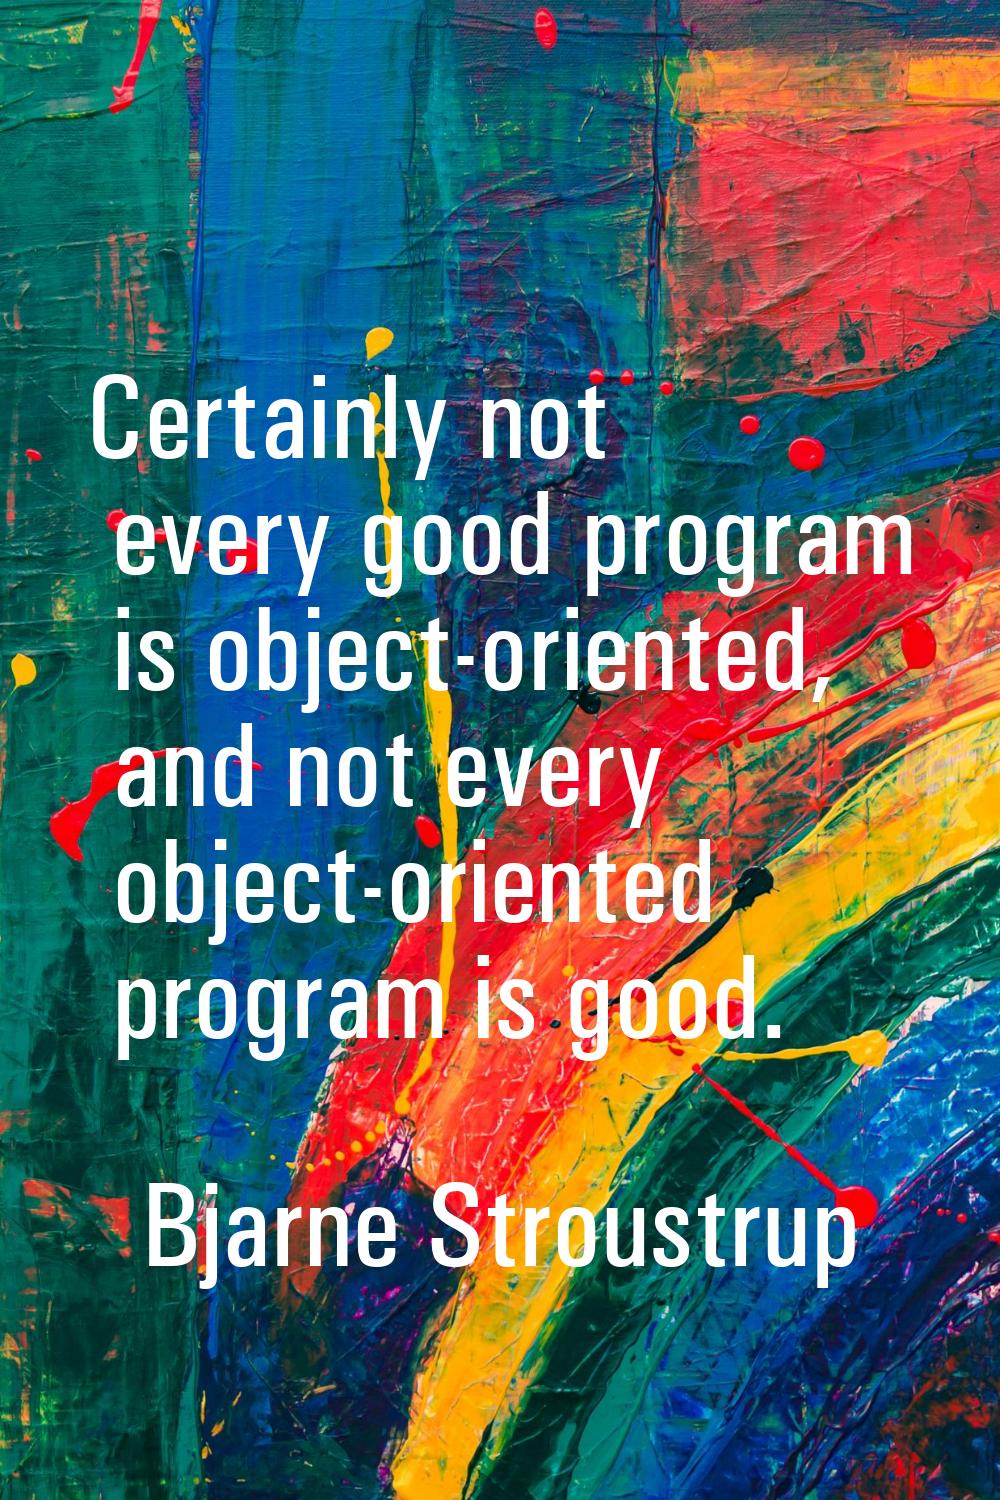 Certainly not every good program is object-oriented, and not every object-oriented program is good.